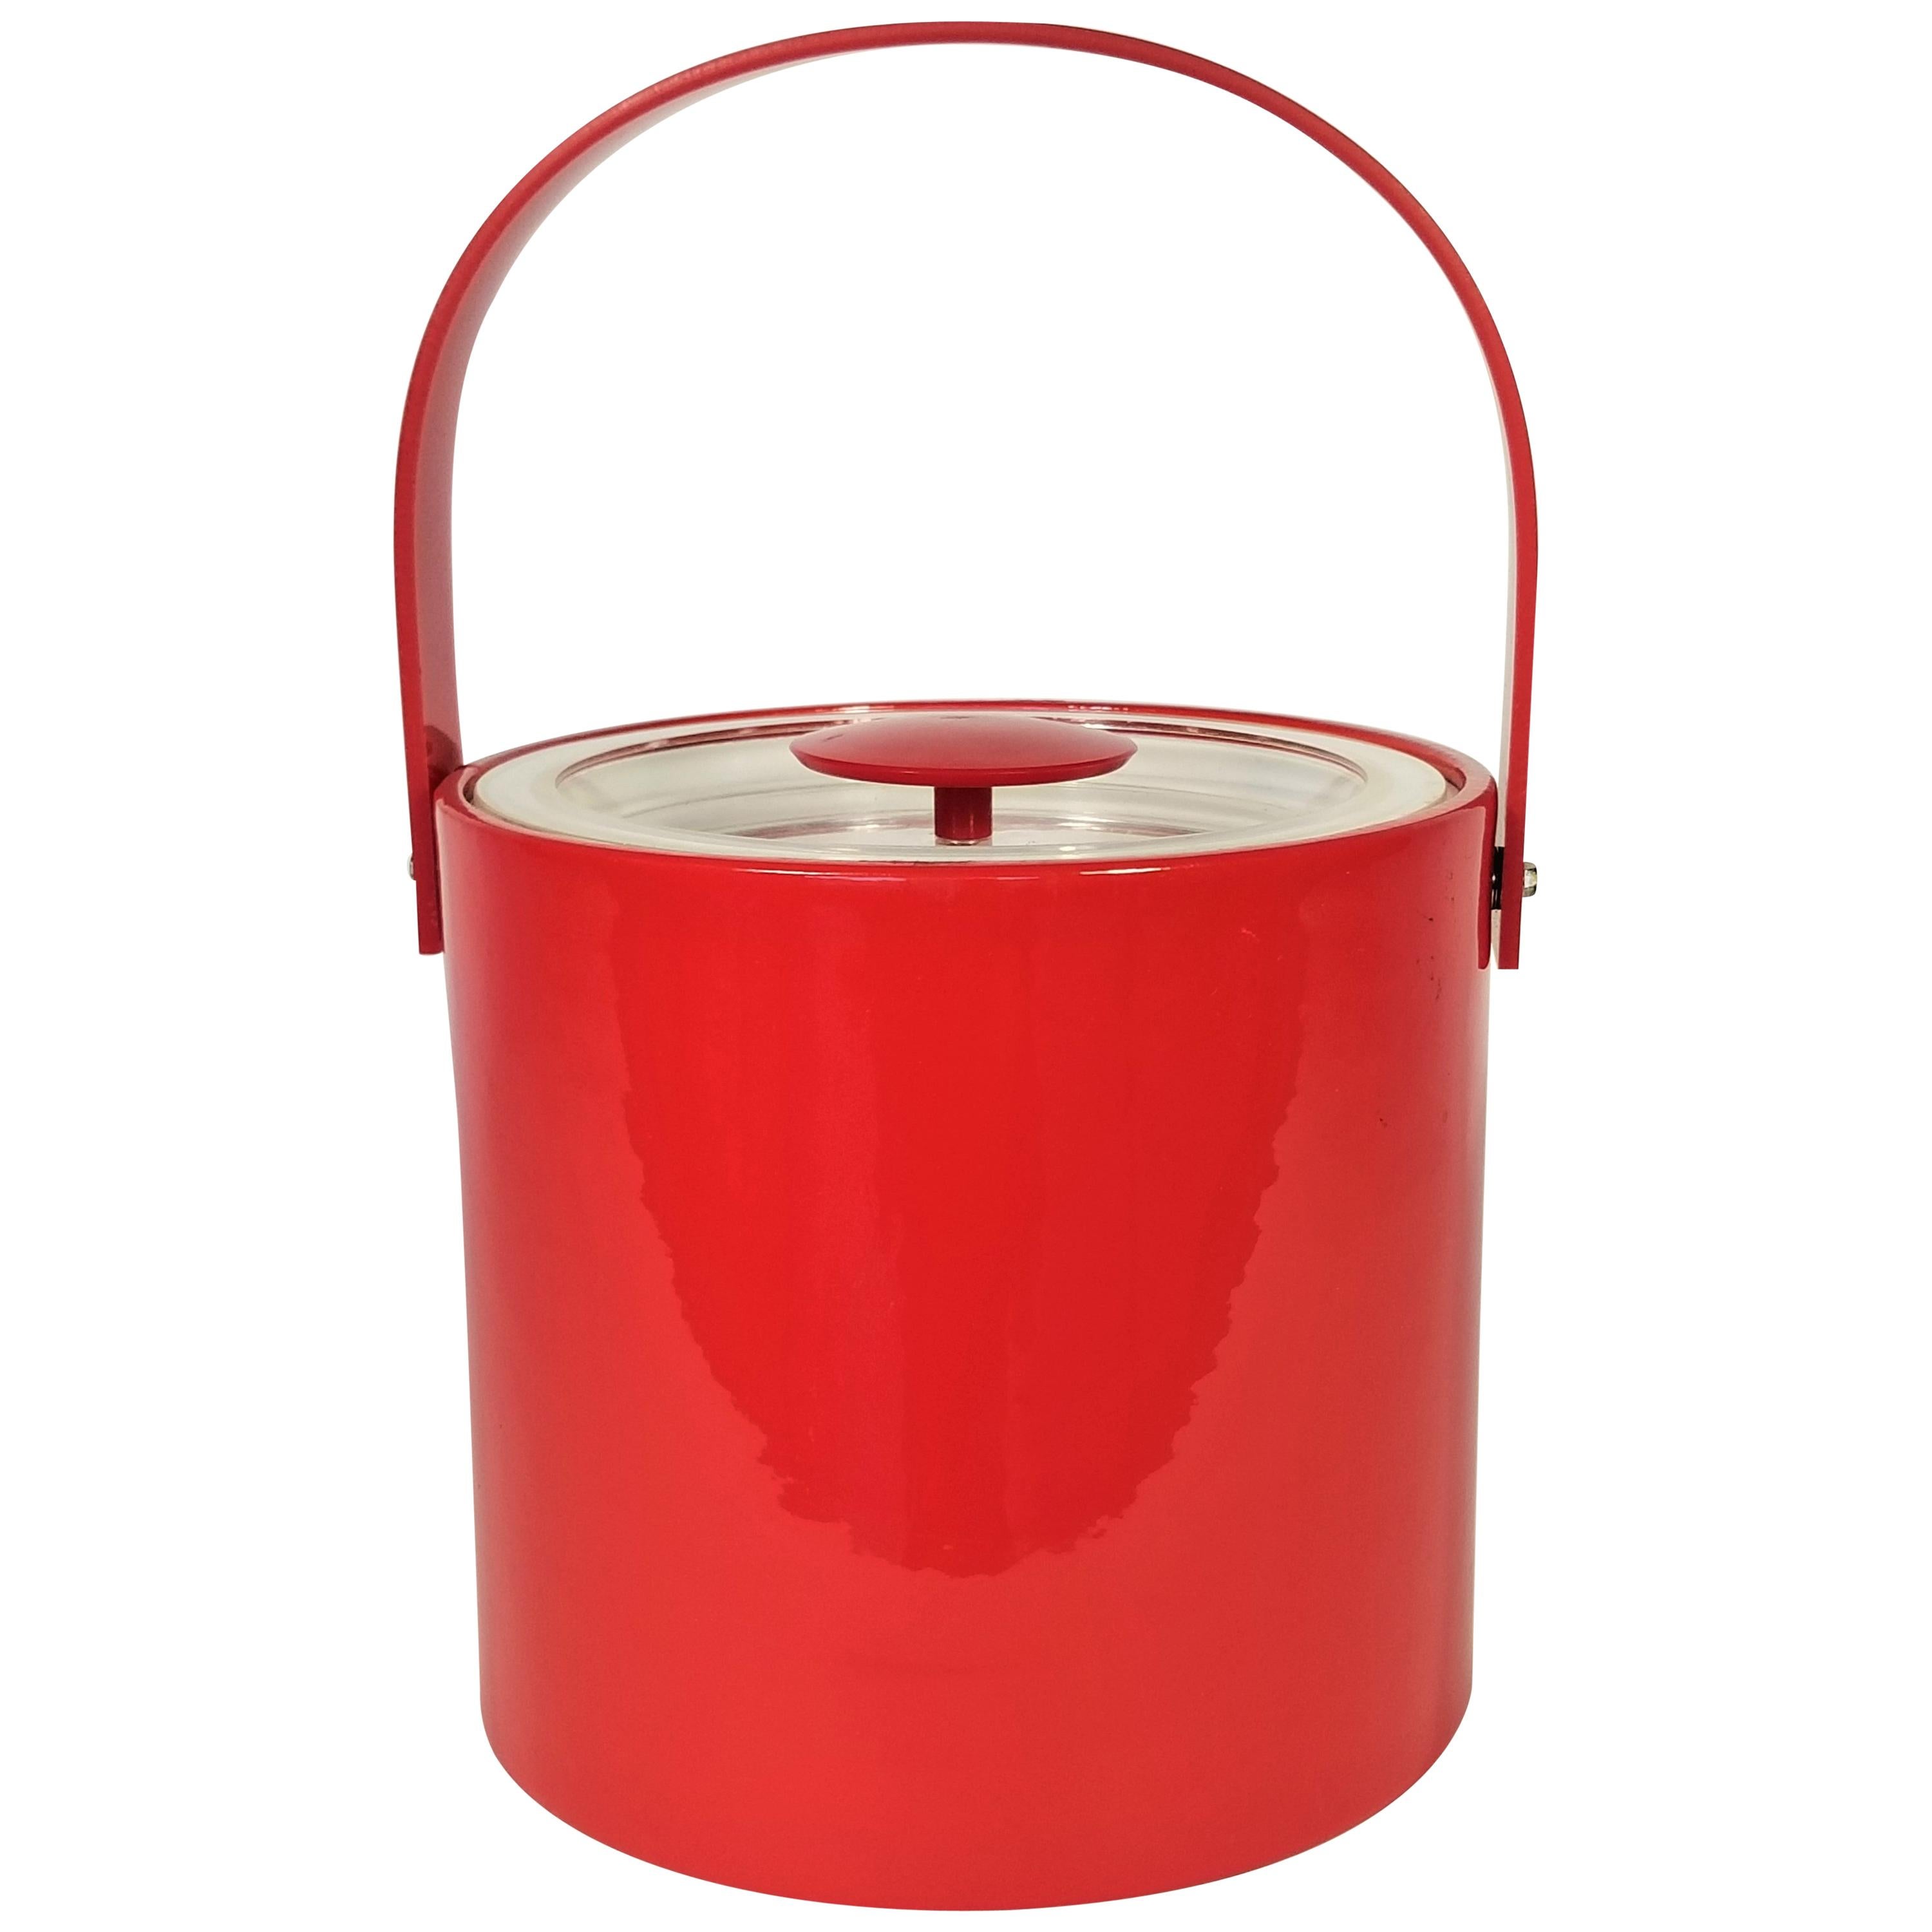 Georges Briard Signed Red Ice Bucket Midcentury